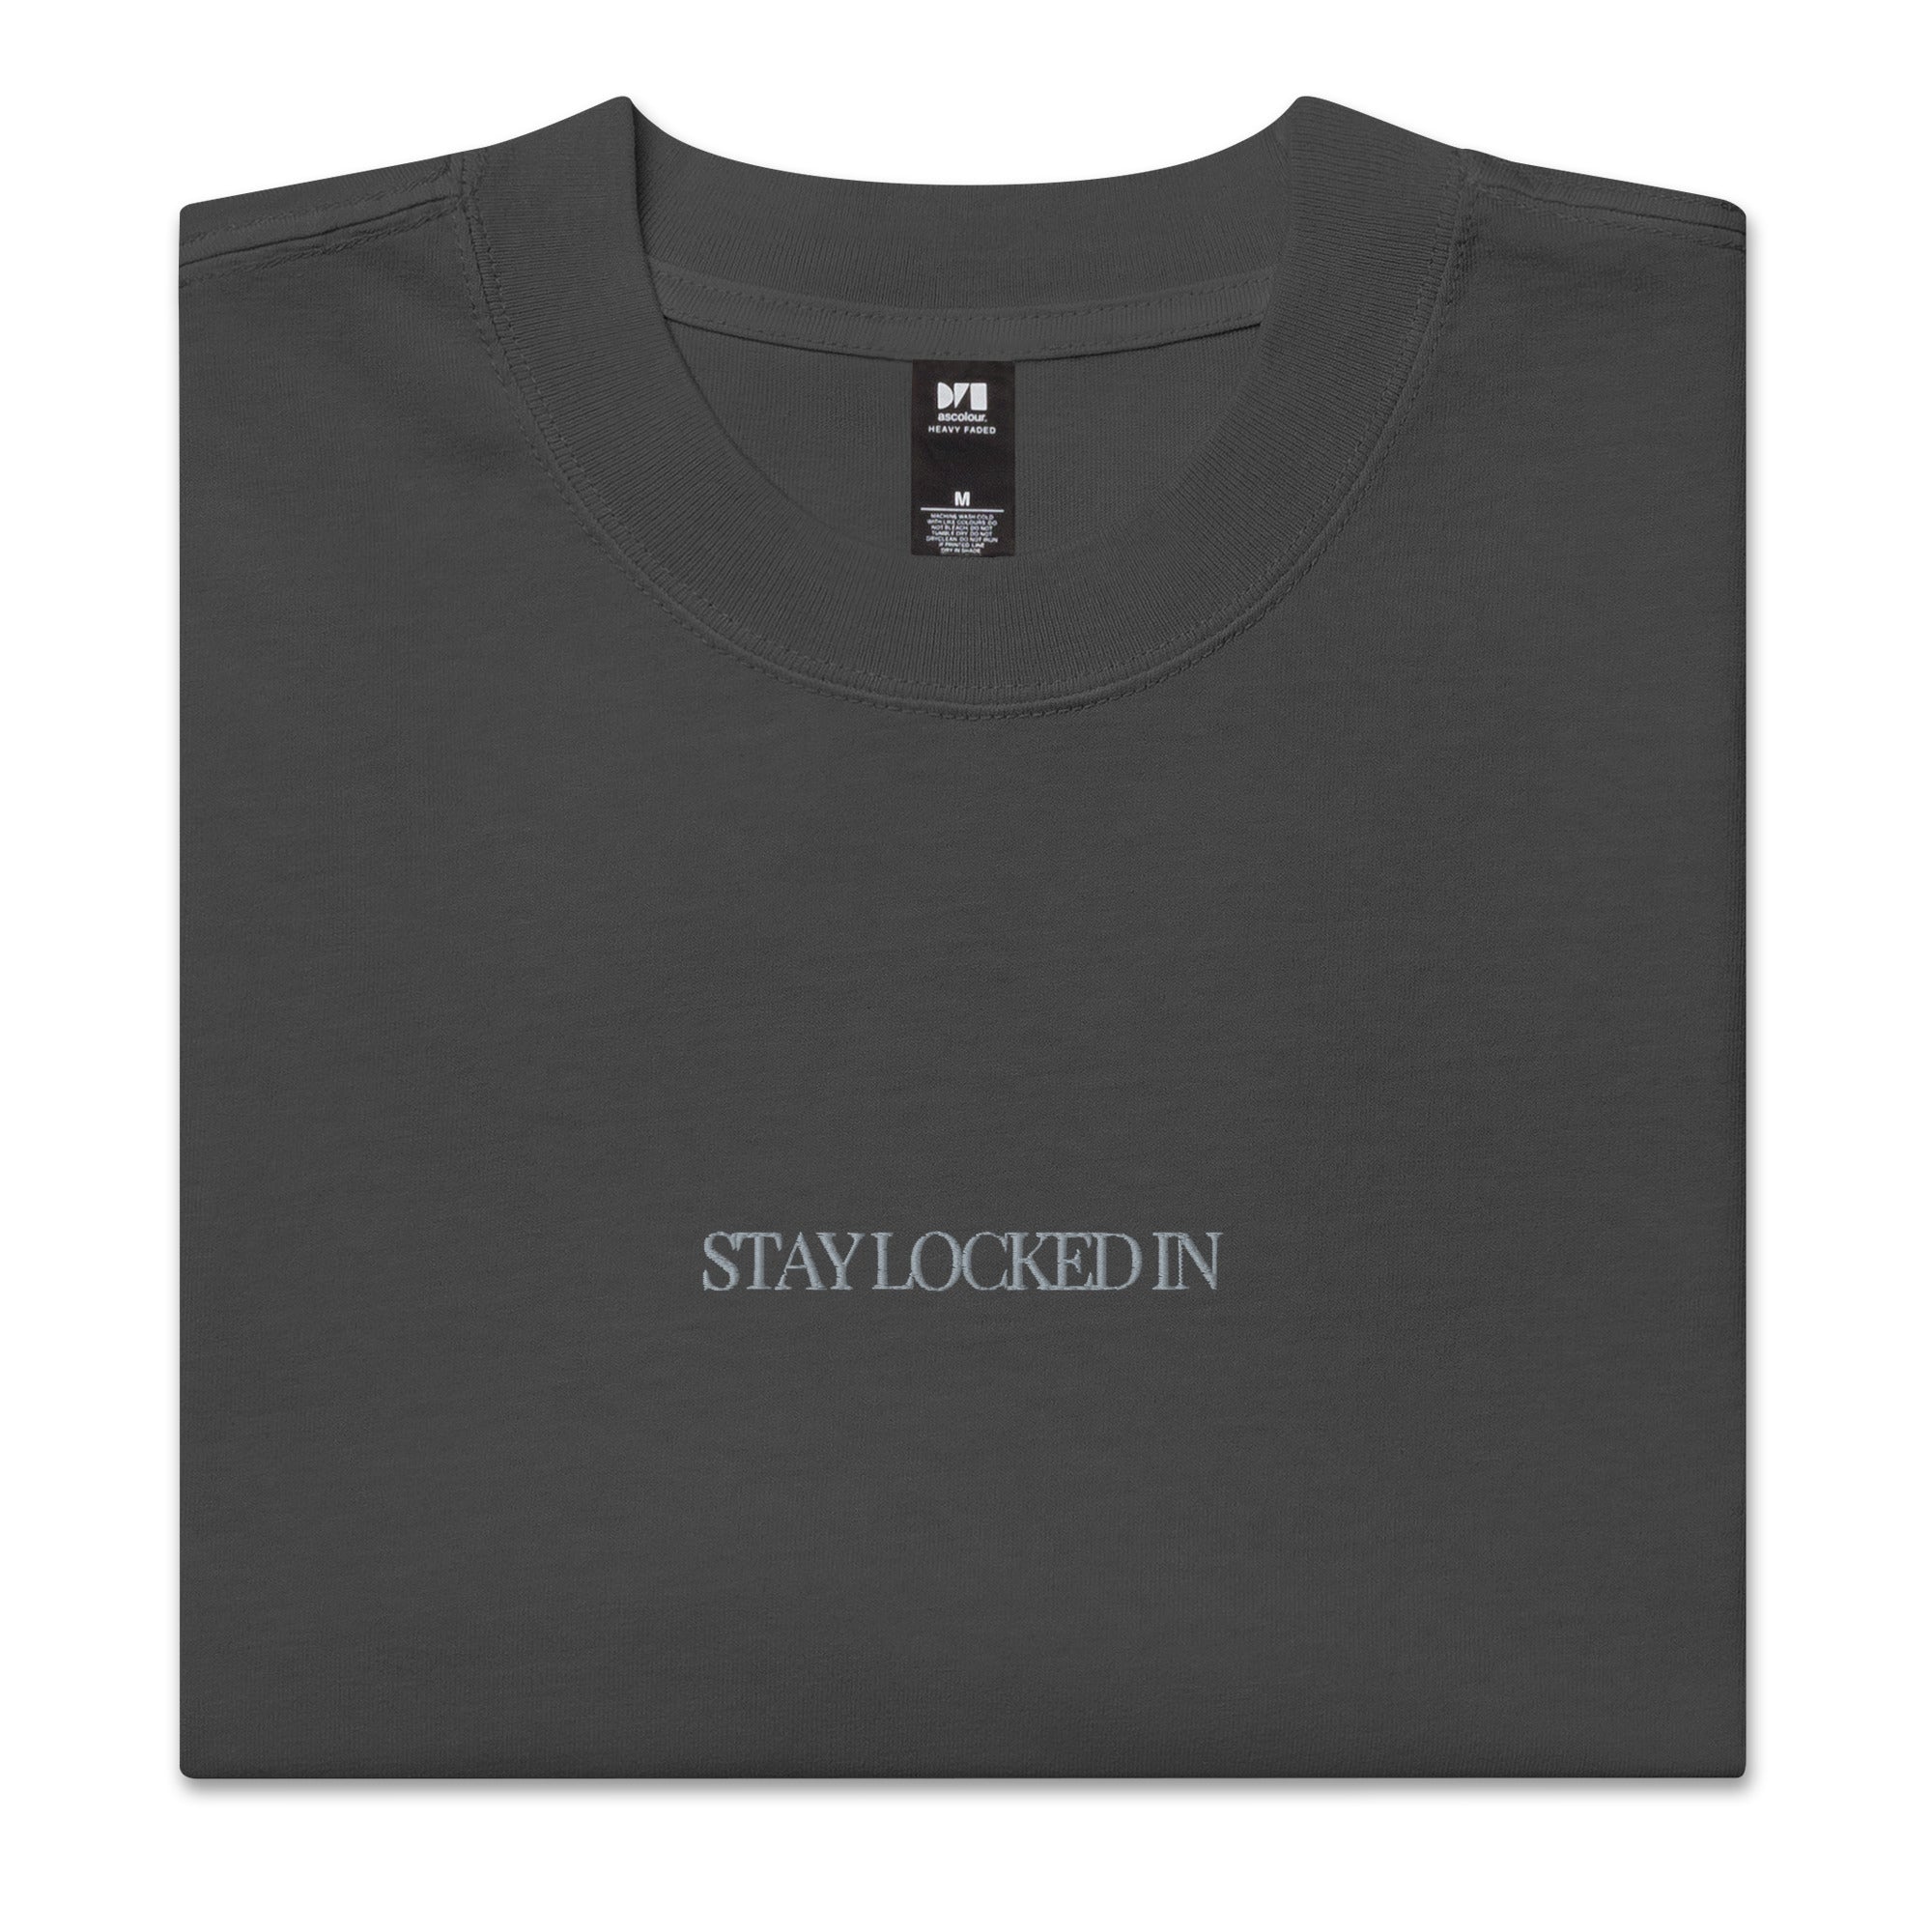 "Stay Locked In" Embroidered Typeface T-Shirt